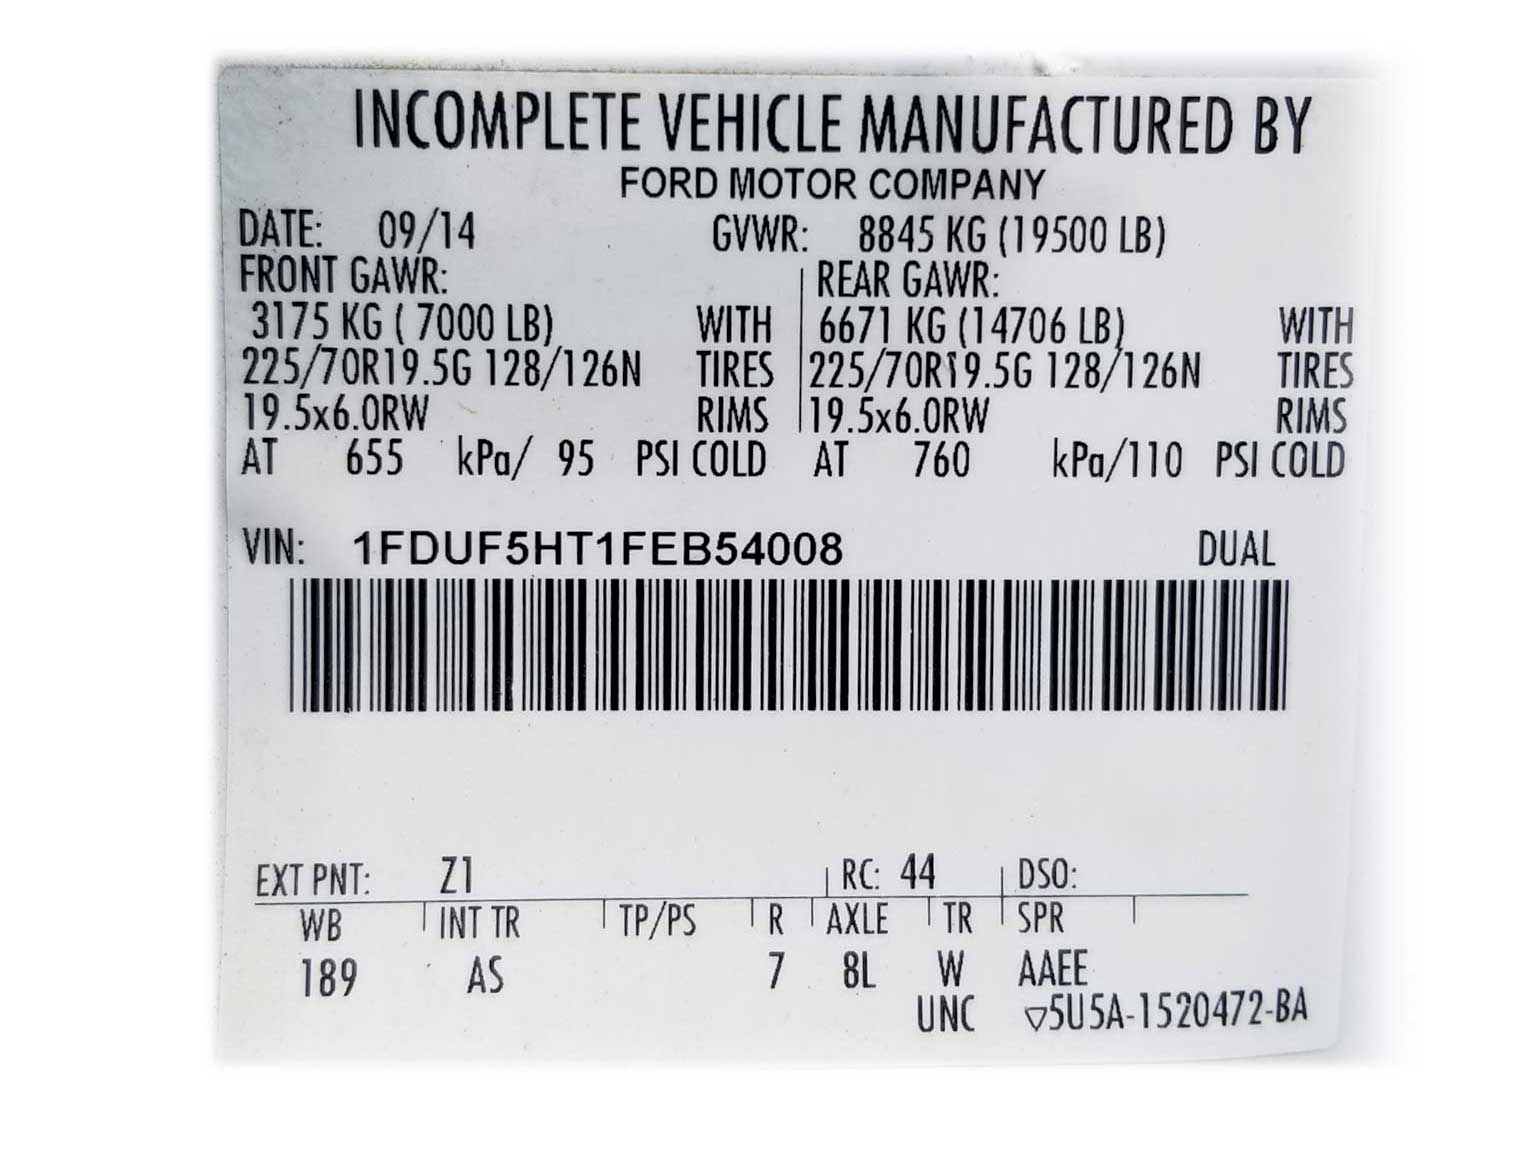 A sticker that says incomplete vehicle manufactured on it